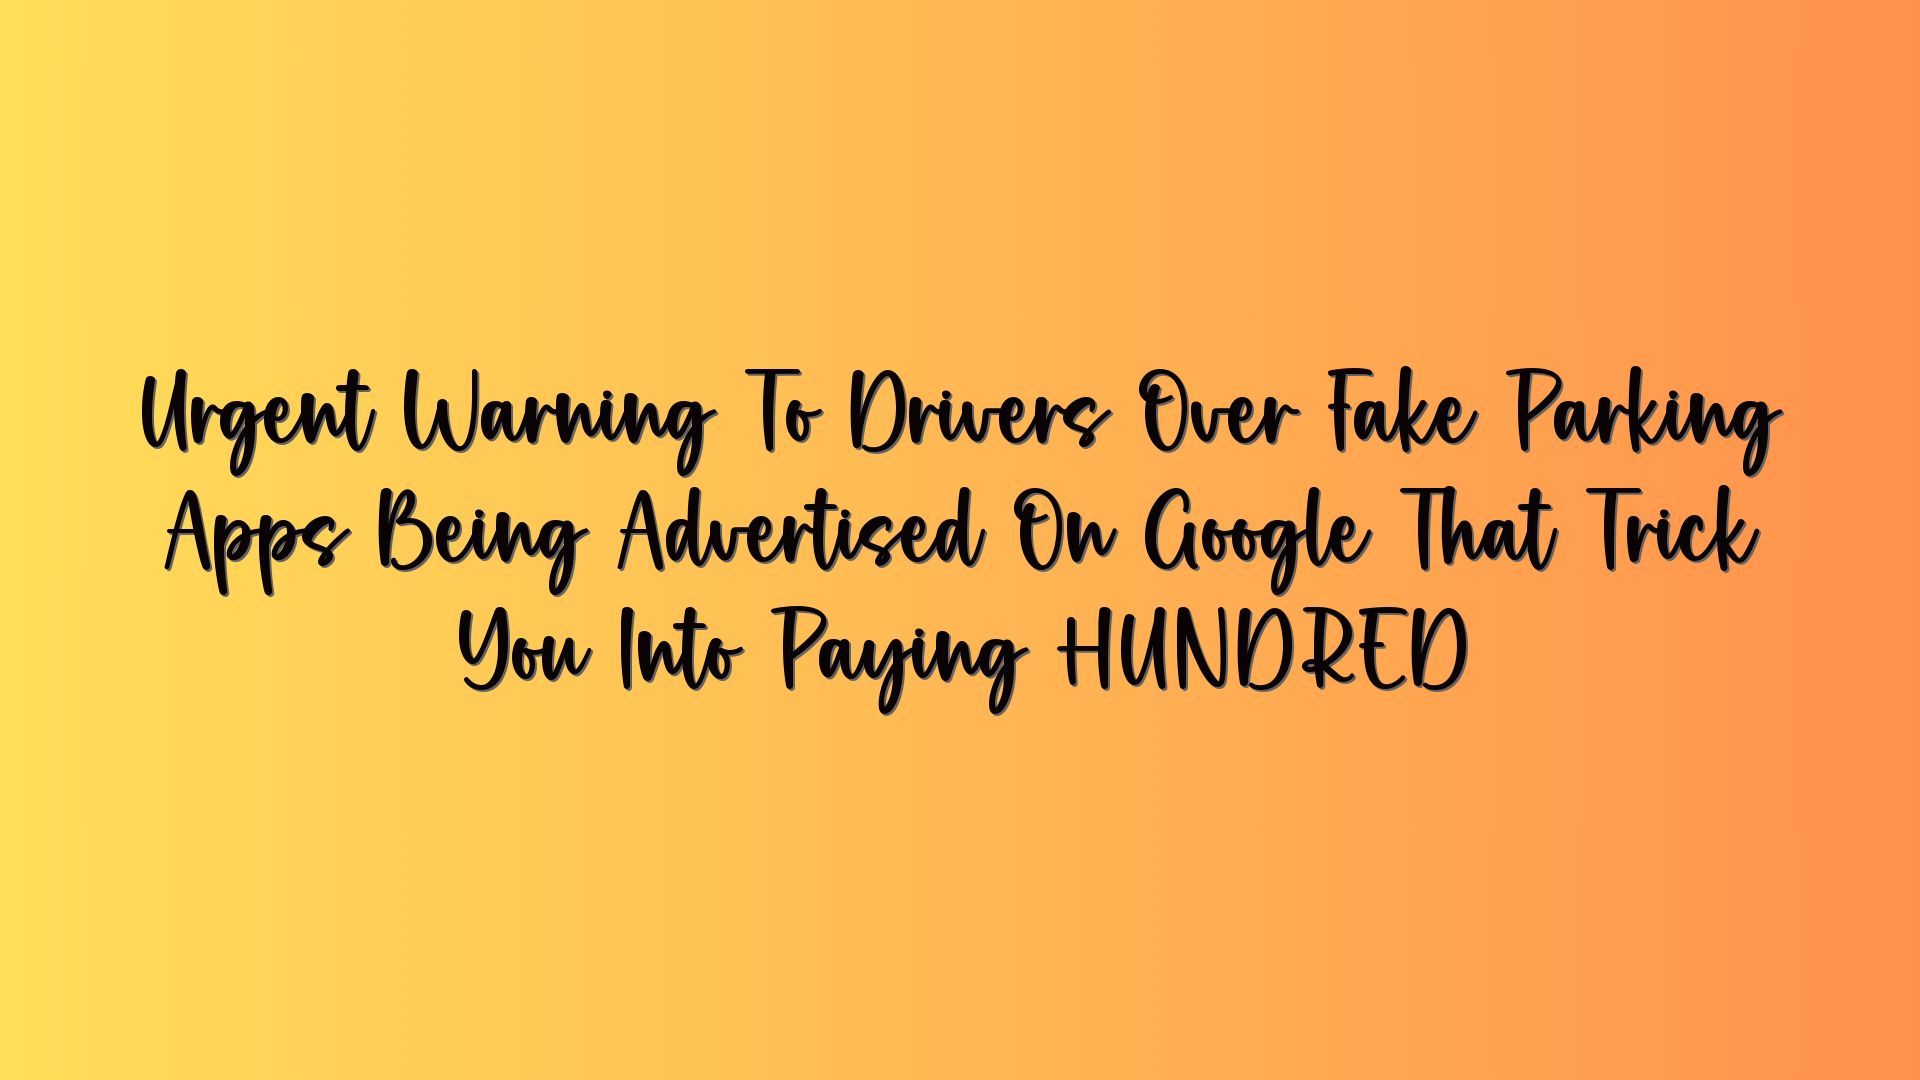 Urgent Warning To Drivers Over Fake Parking Apps Being Advertised On Google That Trick You Into Paying HUNDRED